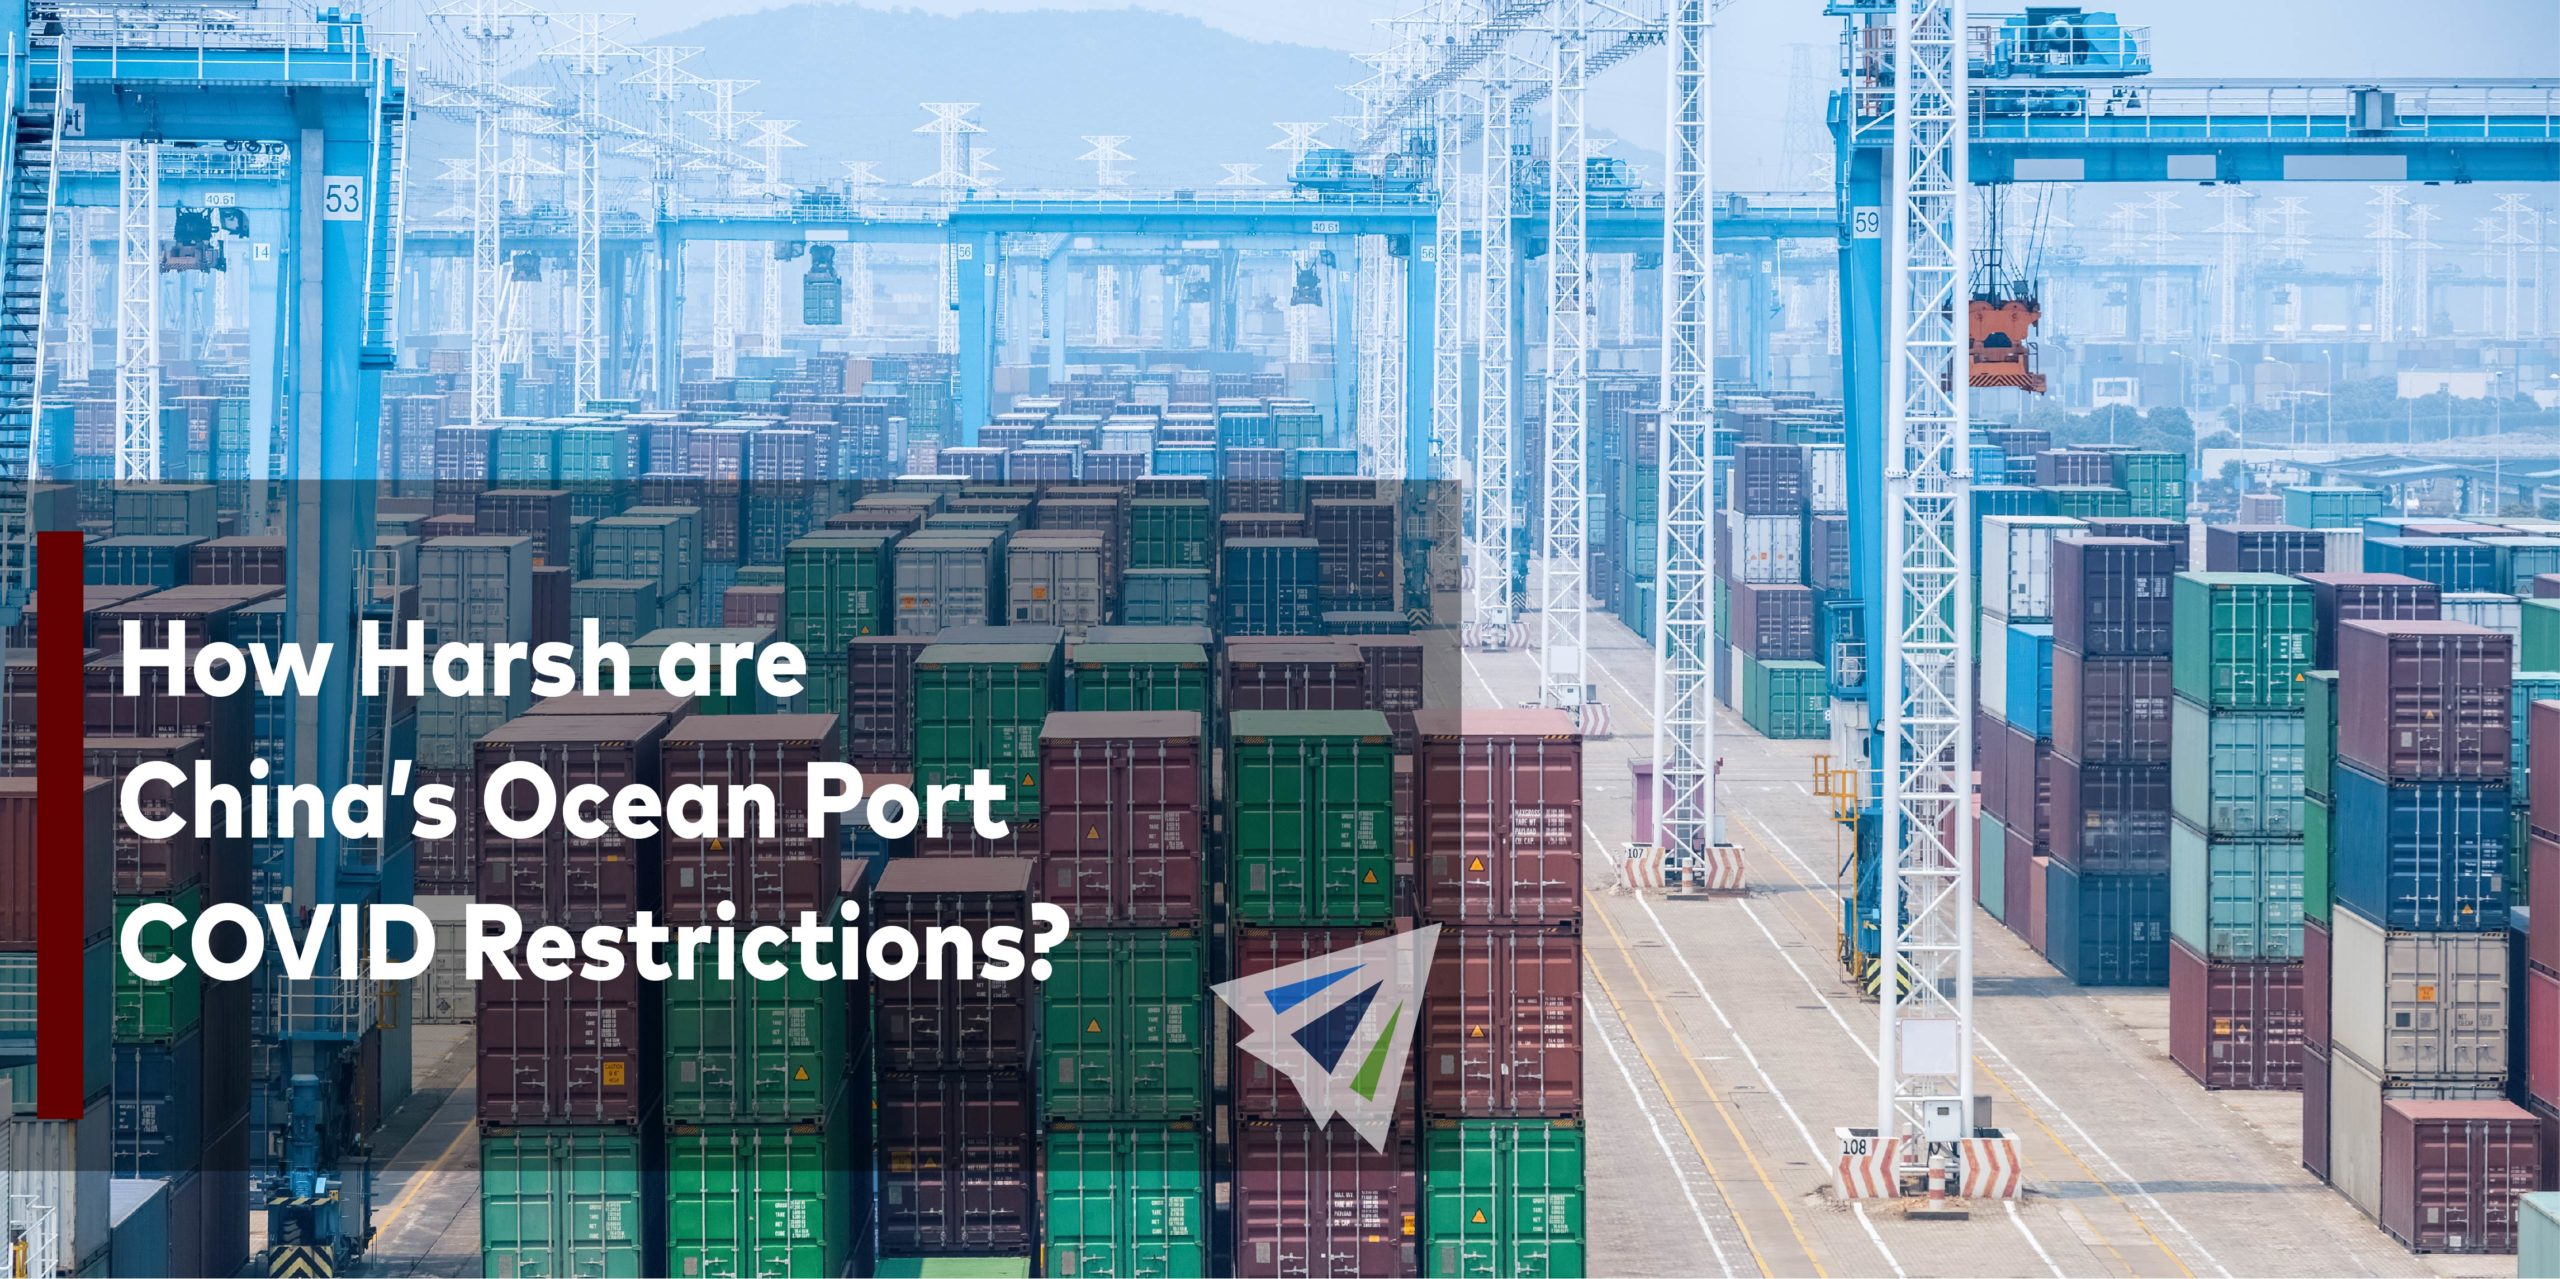 How Harsh are China’s Ocean Port COVID Restrictions?